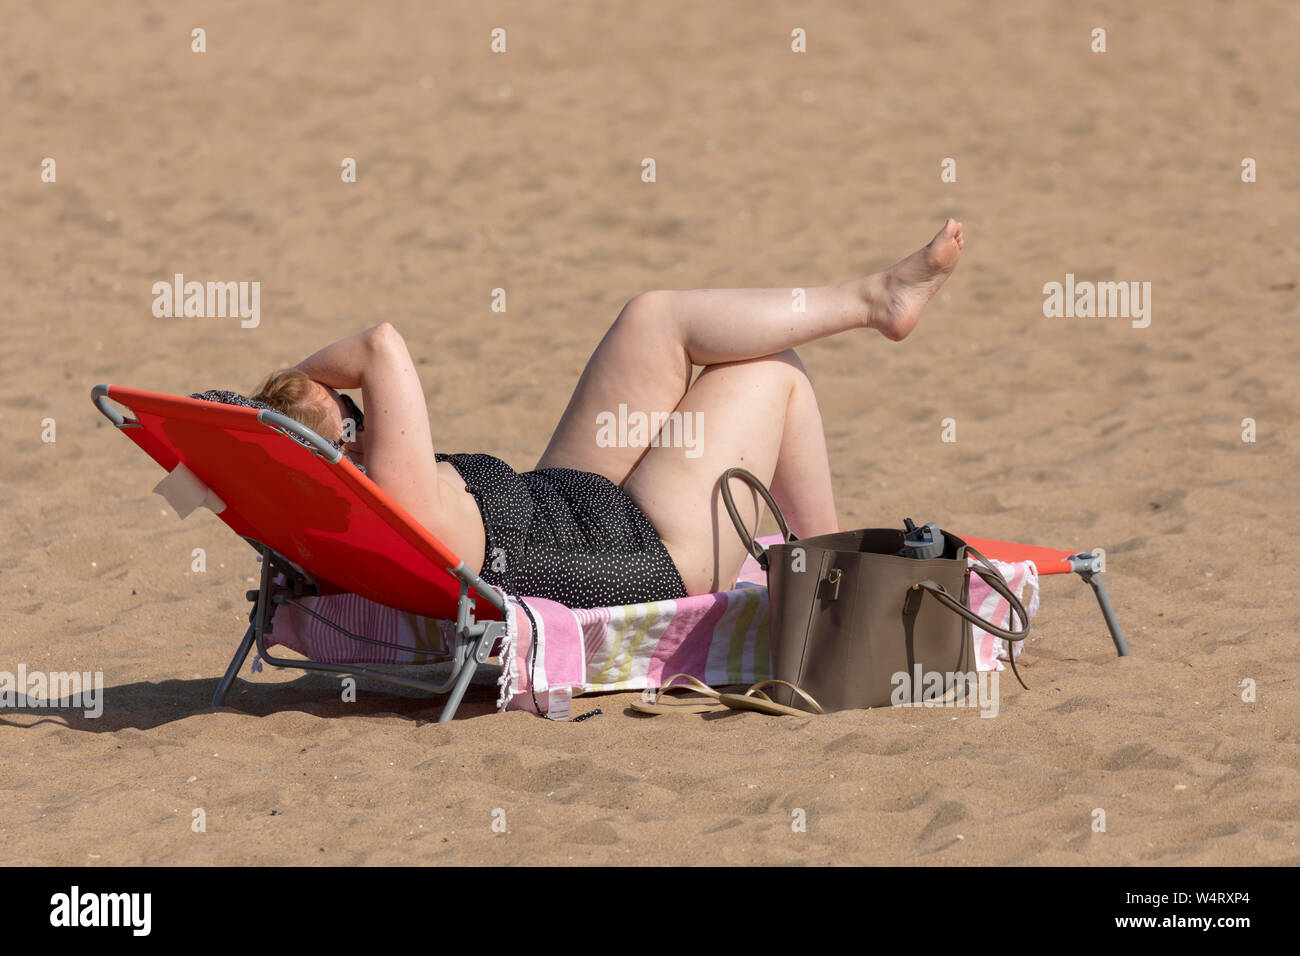 North Wales, UK. 25th July, 2019. UK Weather: Heatwave weather could break UK all time records today for some parts of the UK with temperatures expected to reach the 39C for the south east with many parts above 30C. The North Wales coastline bathed in hot sunshine as the heatwave reaches its peak today as a beach visitor relaxes on Cowlyn Bay Beach, North Wales. Credit: DGDImages/Alamy Live News Stock Photo